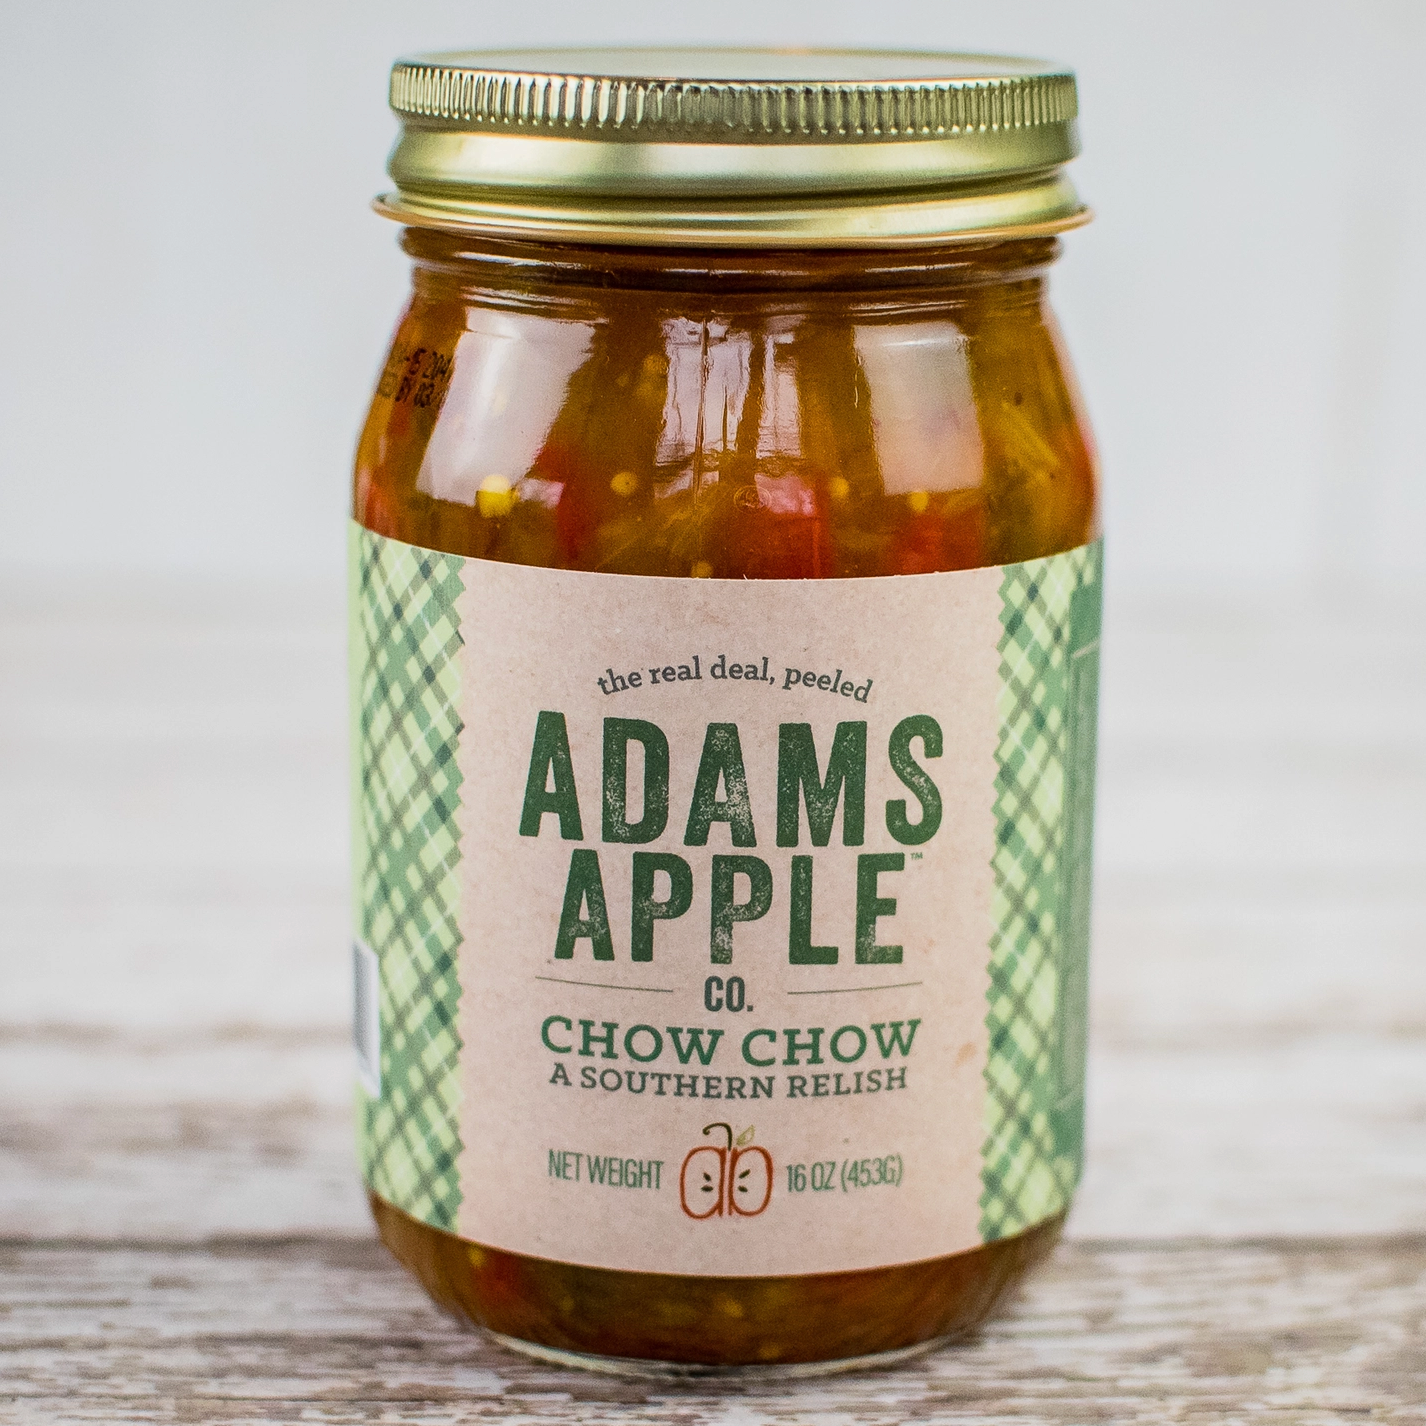 Chow Chow by Adam's Apple